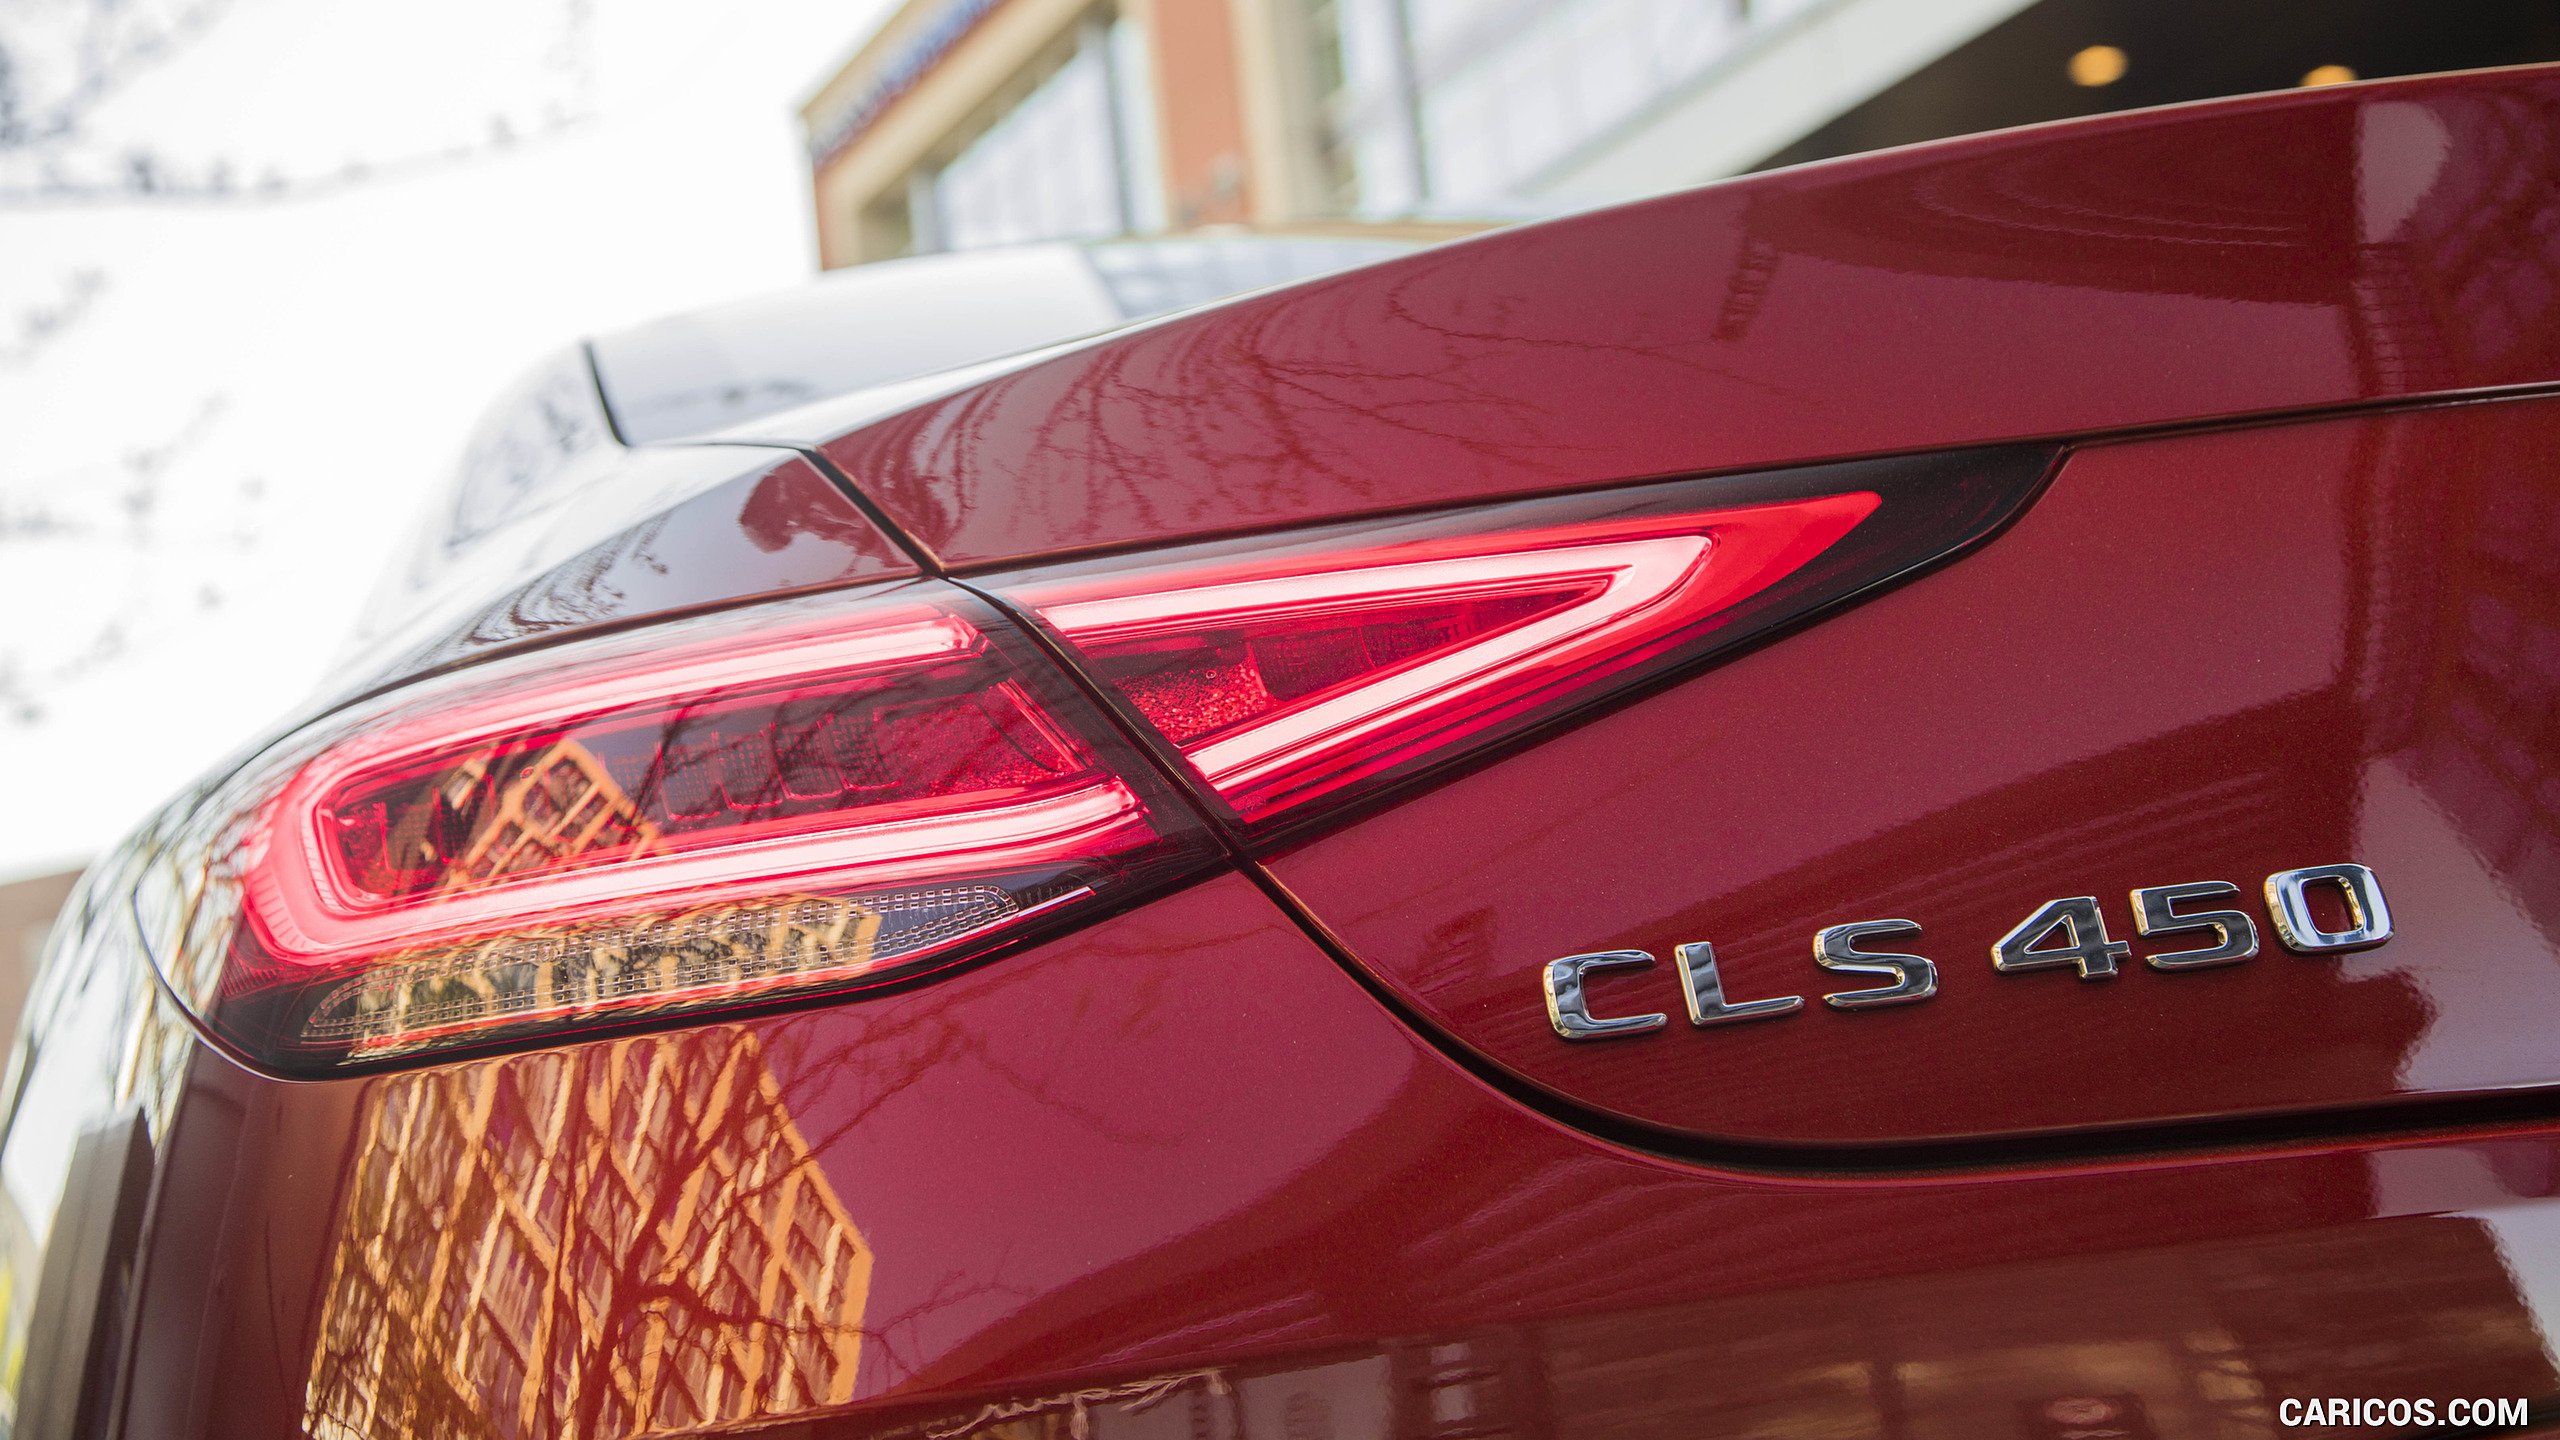 2019 Mercedes-Benz CLS 450 4MATIC (US-Spec) - Tail Light, #208 of 231